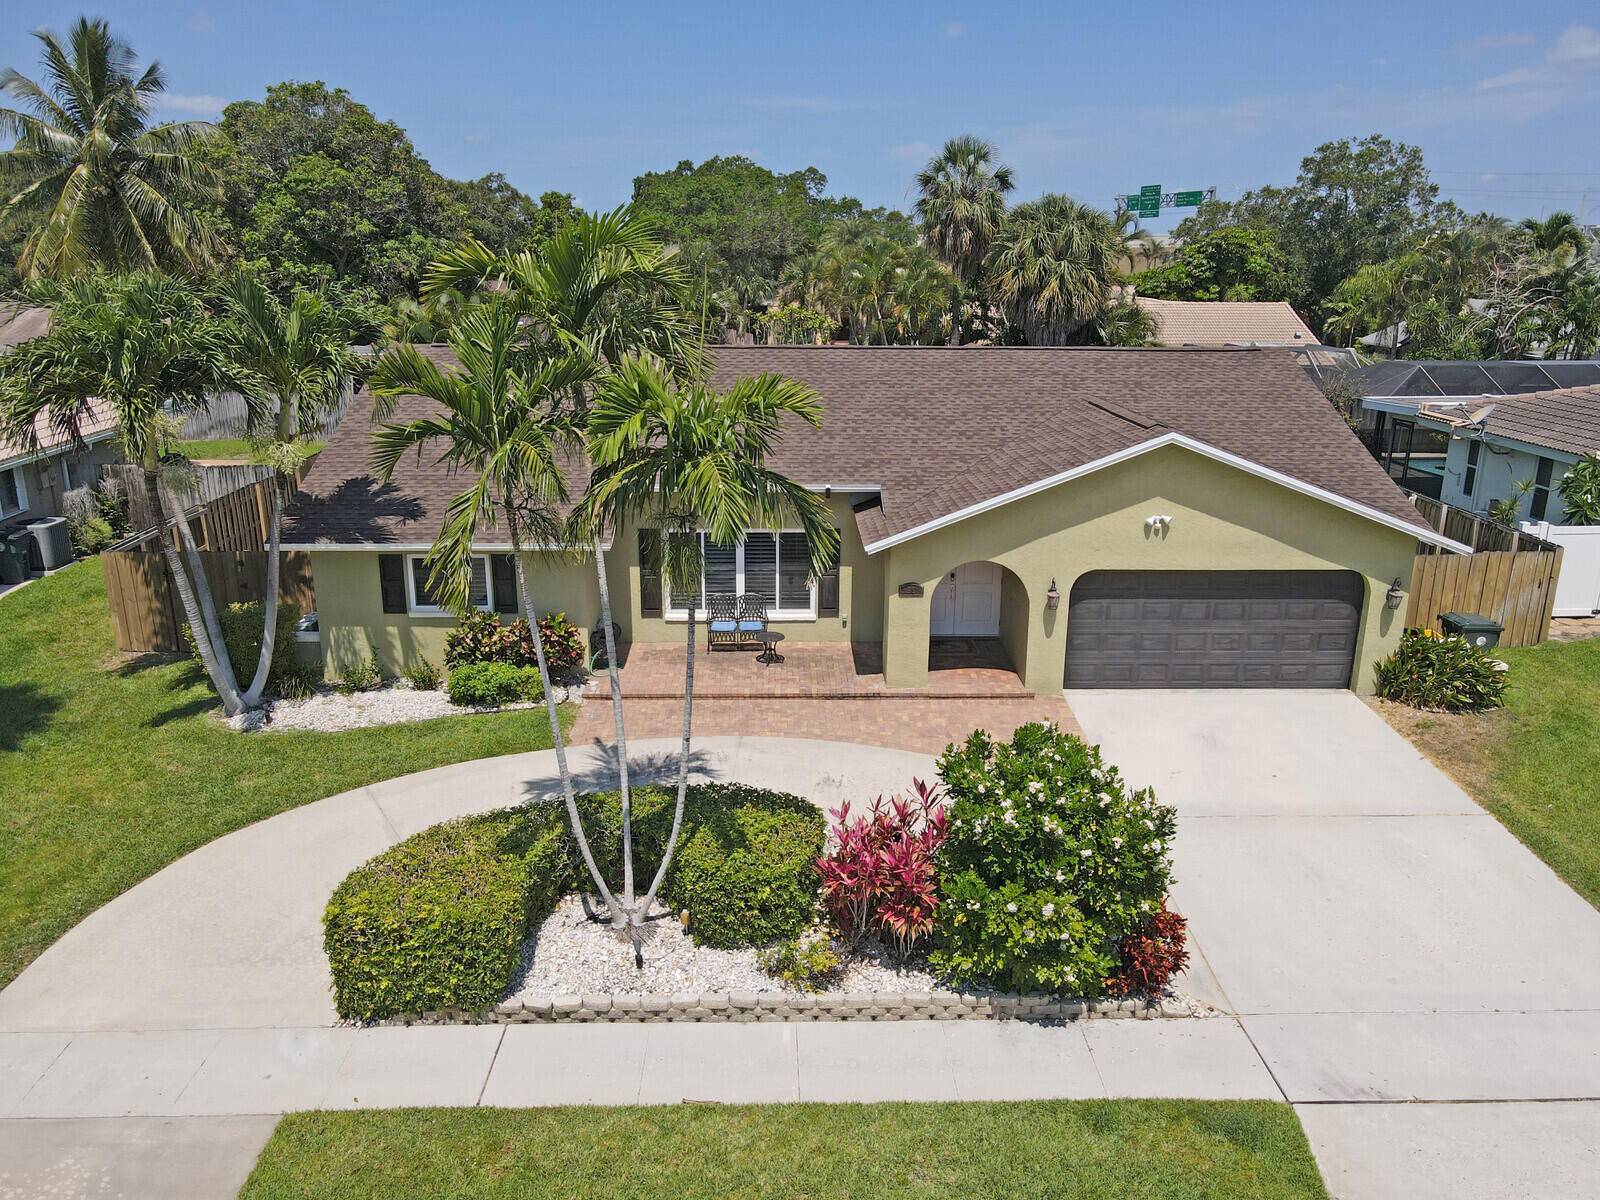 Recently renovated this home is a split floor plan 3 bedrooms 2 bath ideally located in East Boca Raton within the highly sought after school district of Addison Mizner.